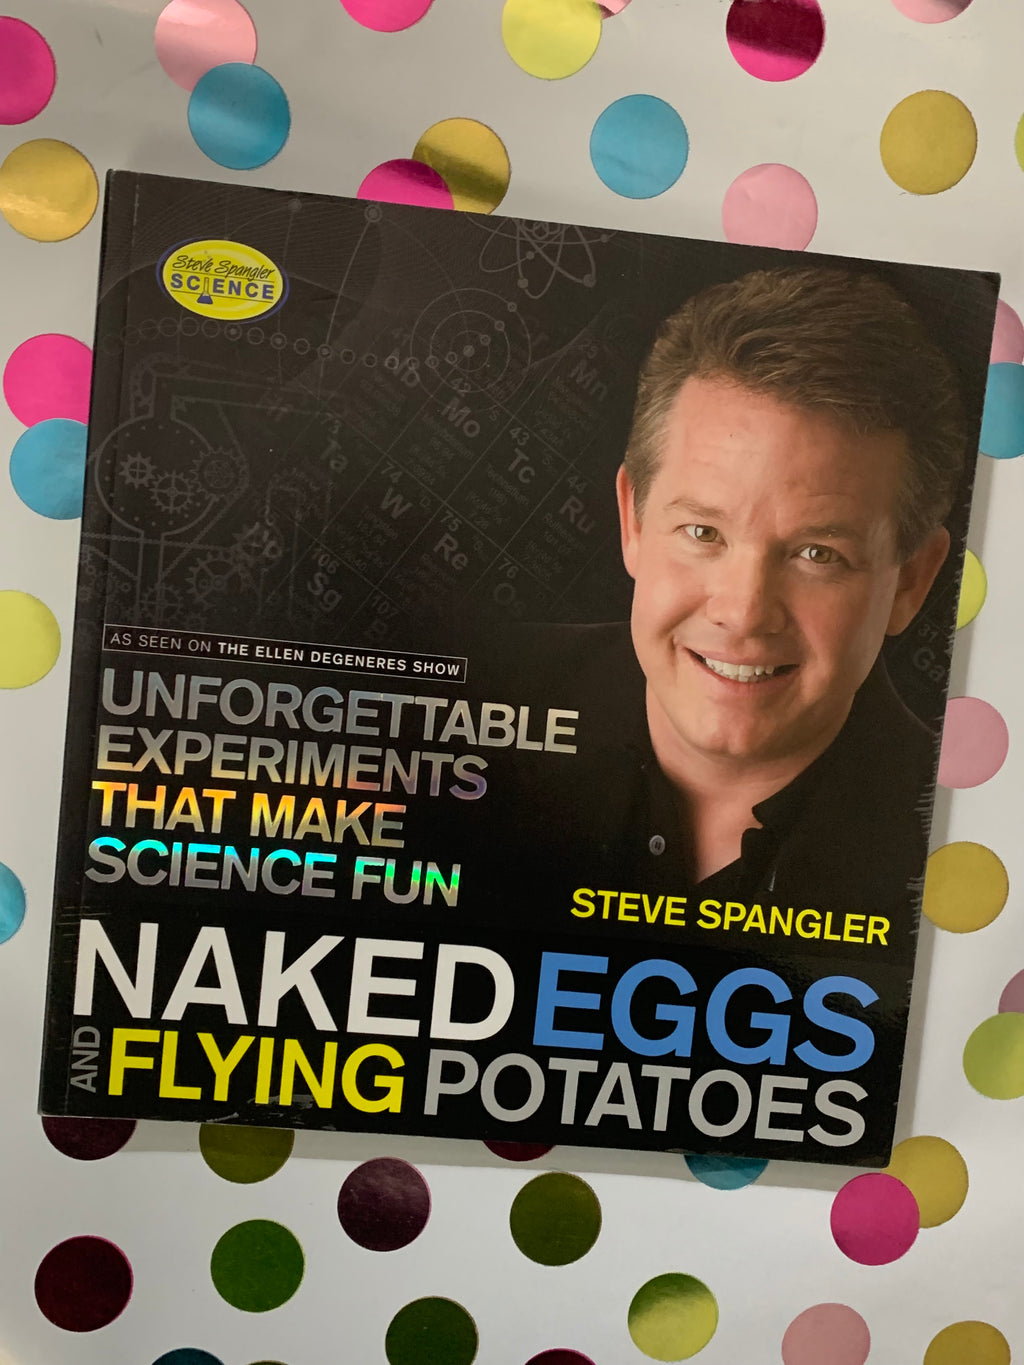 Naked Eggs Flying Potatoes: Unforgettable Experiments That Make Science Fun- By Steve Spangler